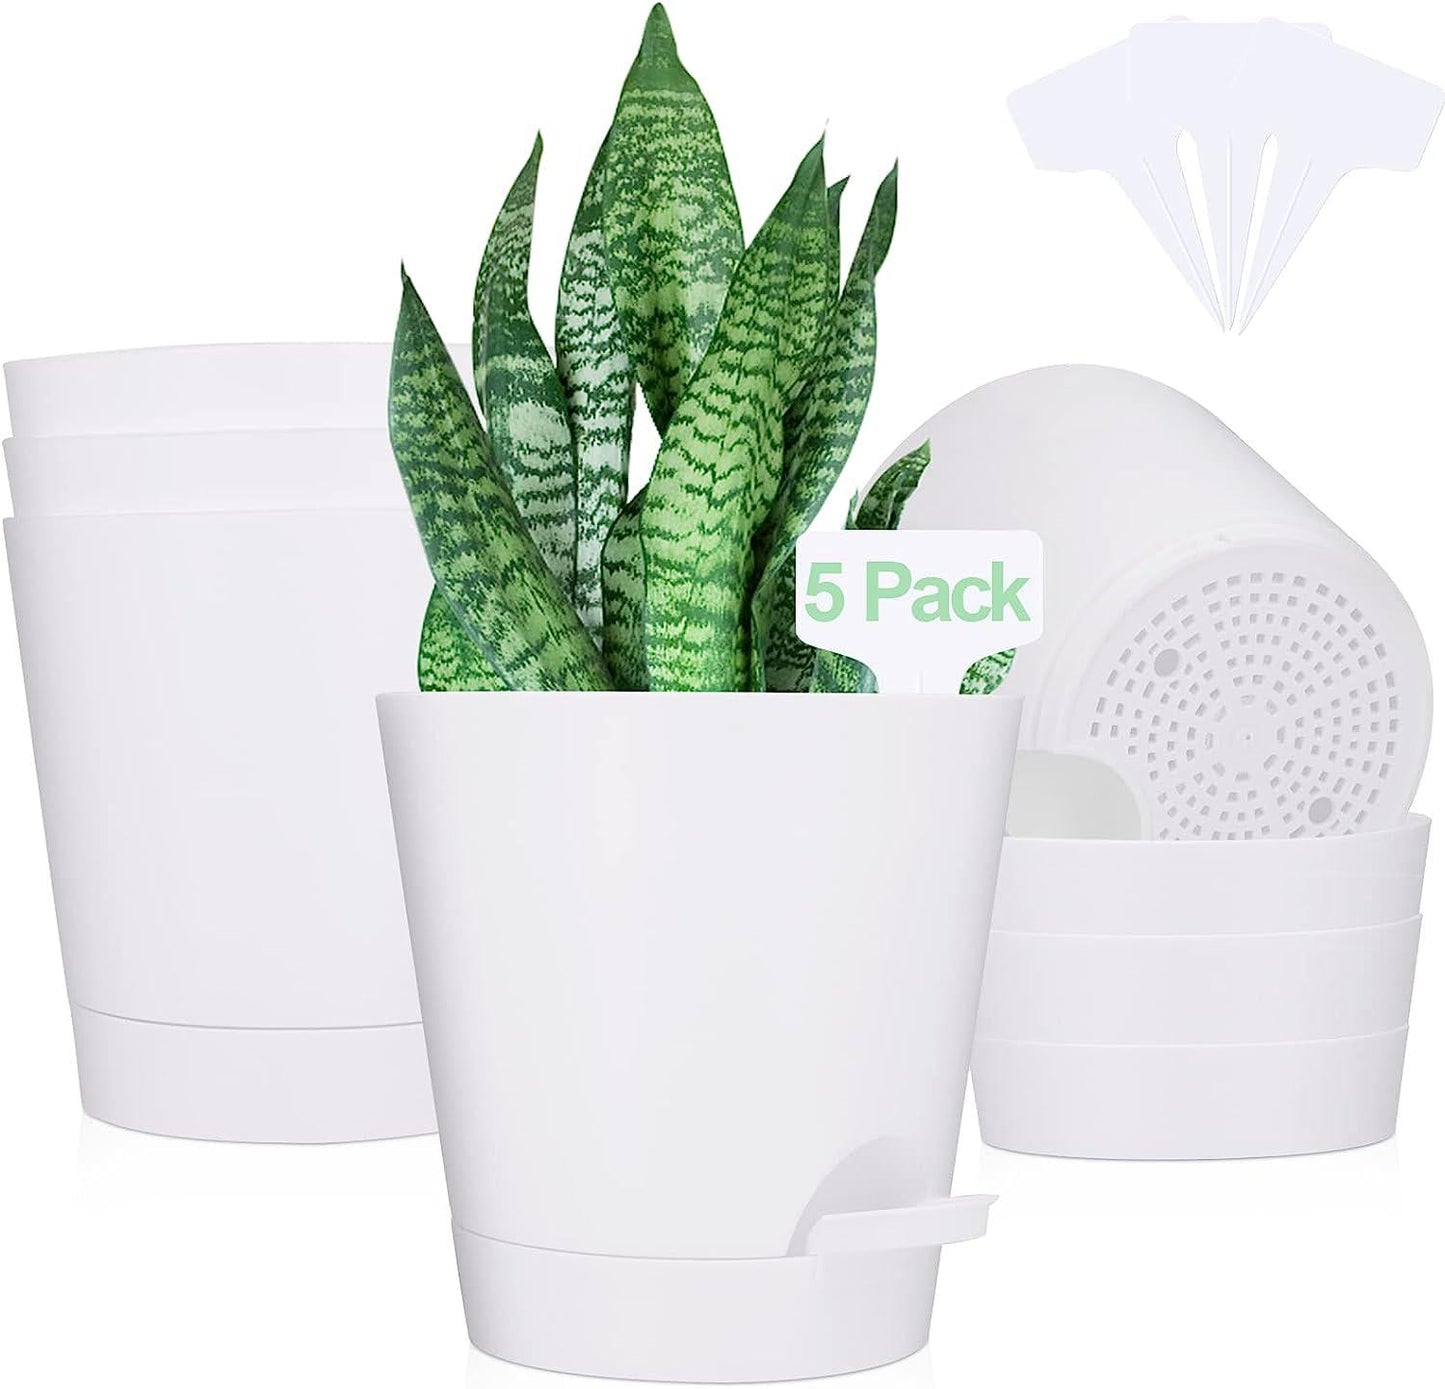 HQMHLCD Plant Pots, 5 Pack 6 Inch Flower Pots Self Watering Plastic Planter with Drainage Hole SaucersÂ for Indoor Outdoor Succulents, Â African Violet Flower Plants (White-6 inch)-